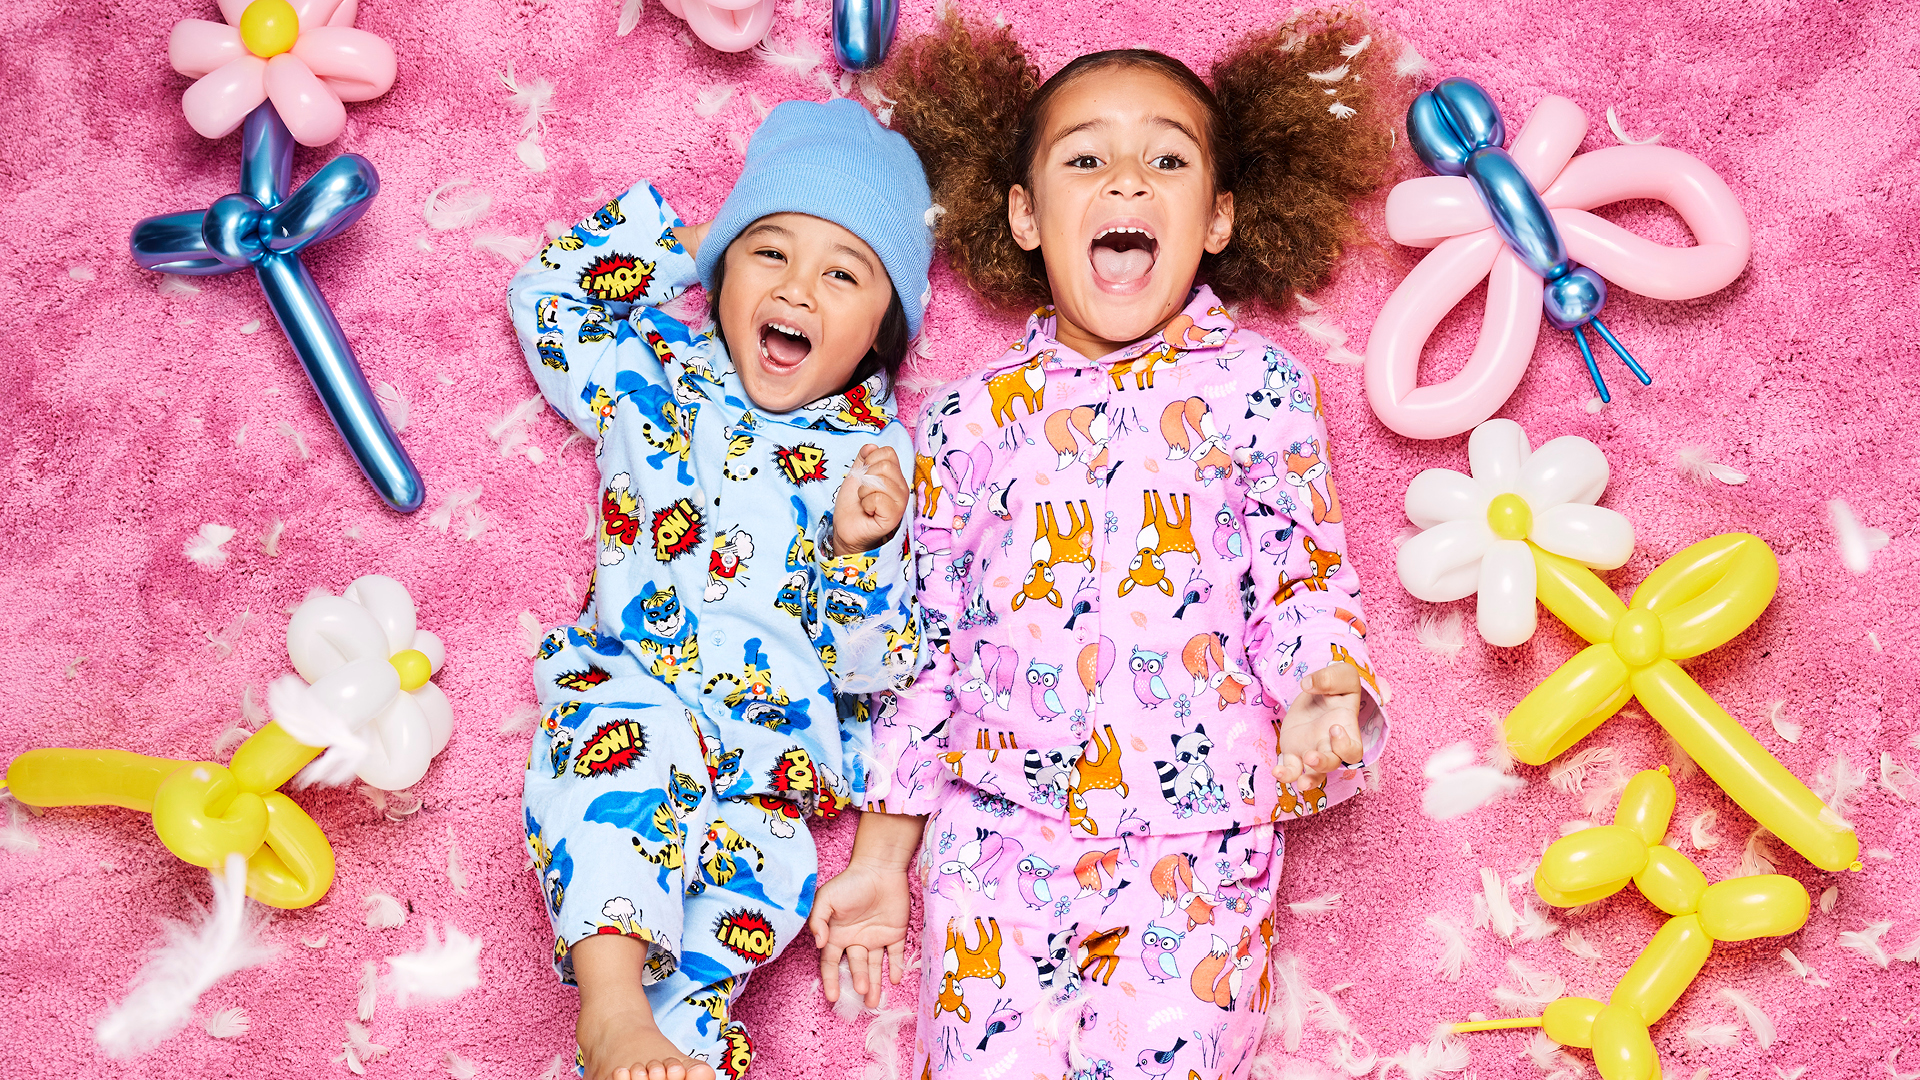 It’s time for SNOOZEFEST in Best & Less’s newest sleepwear